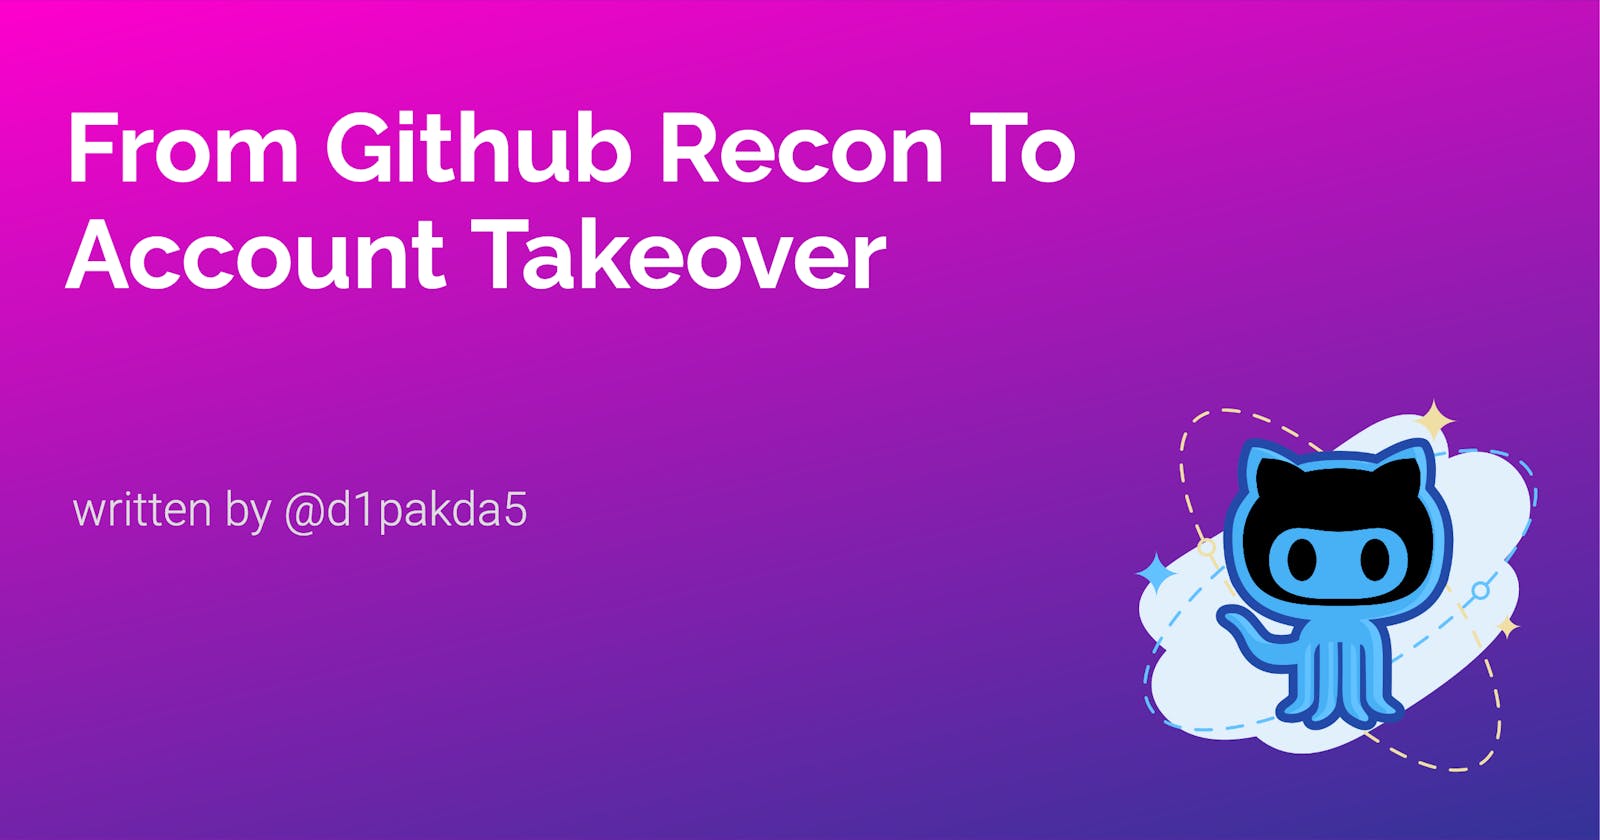 From Github Recon To Account Takeover